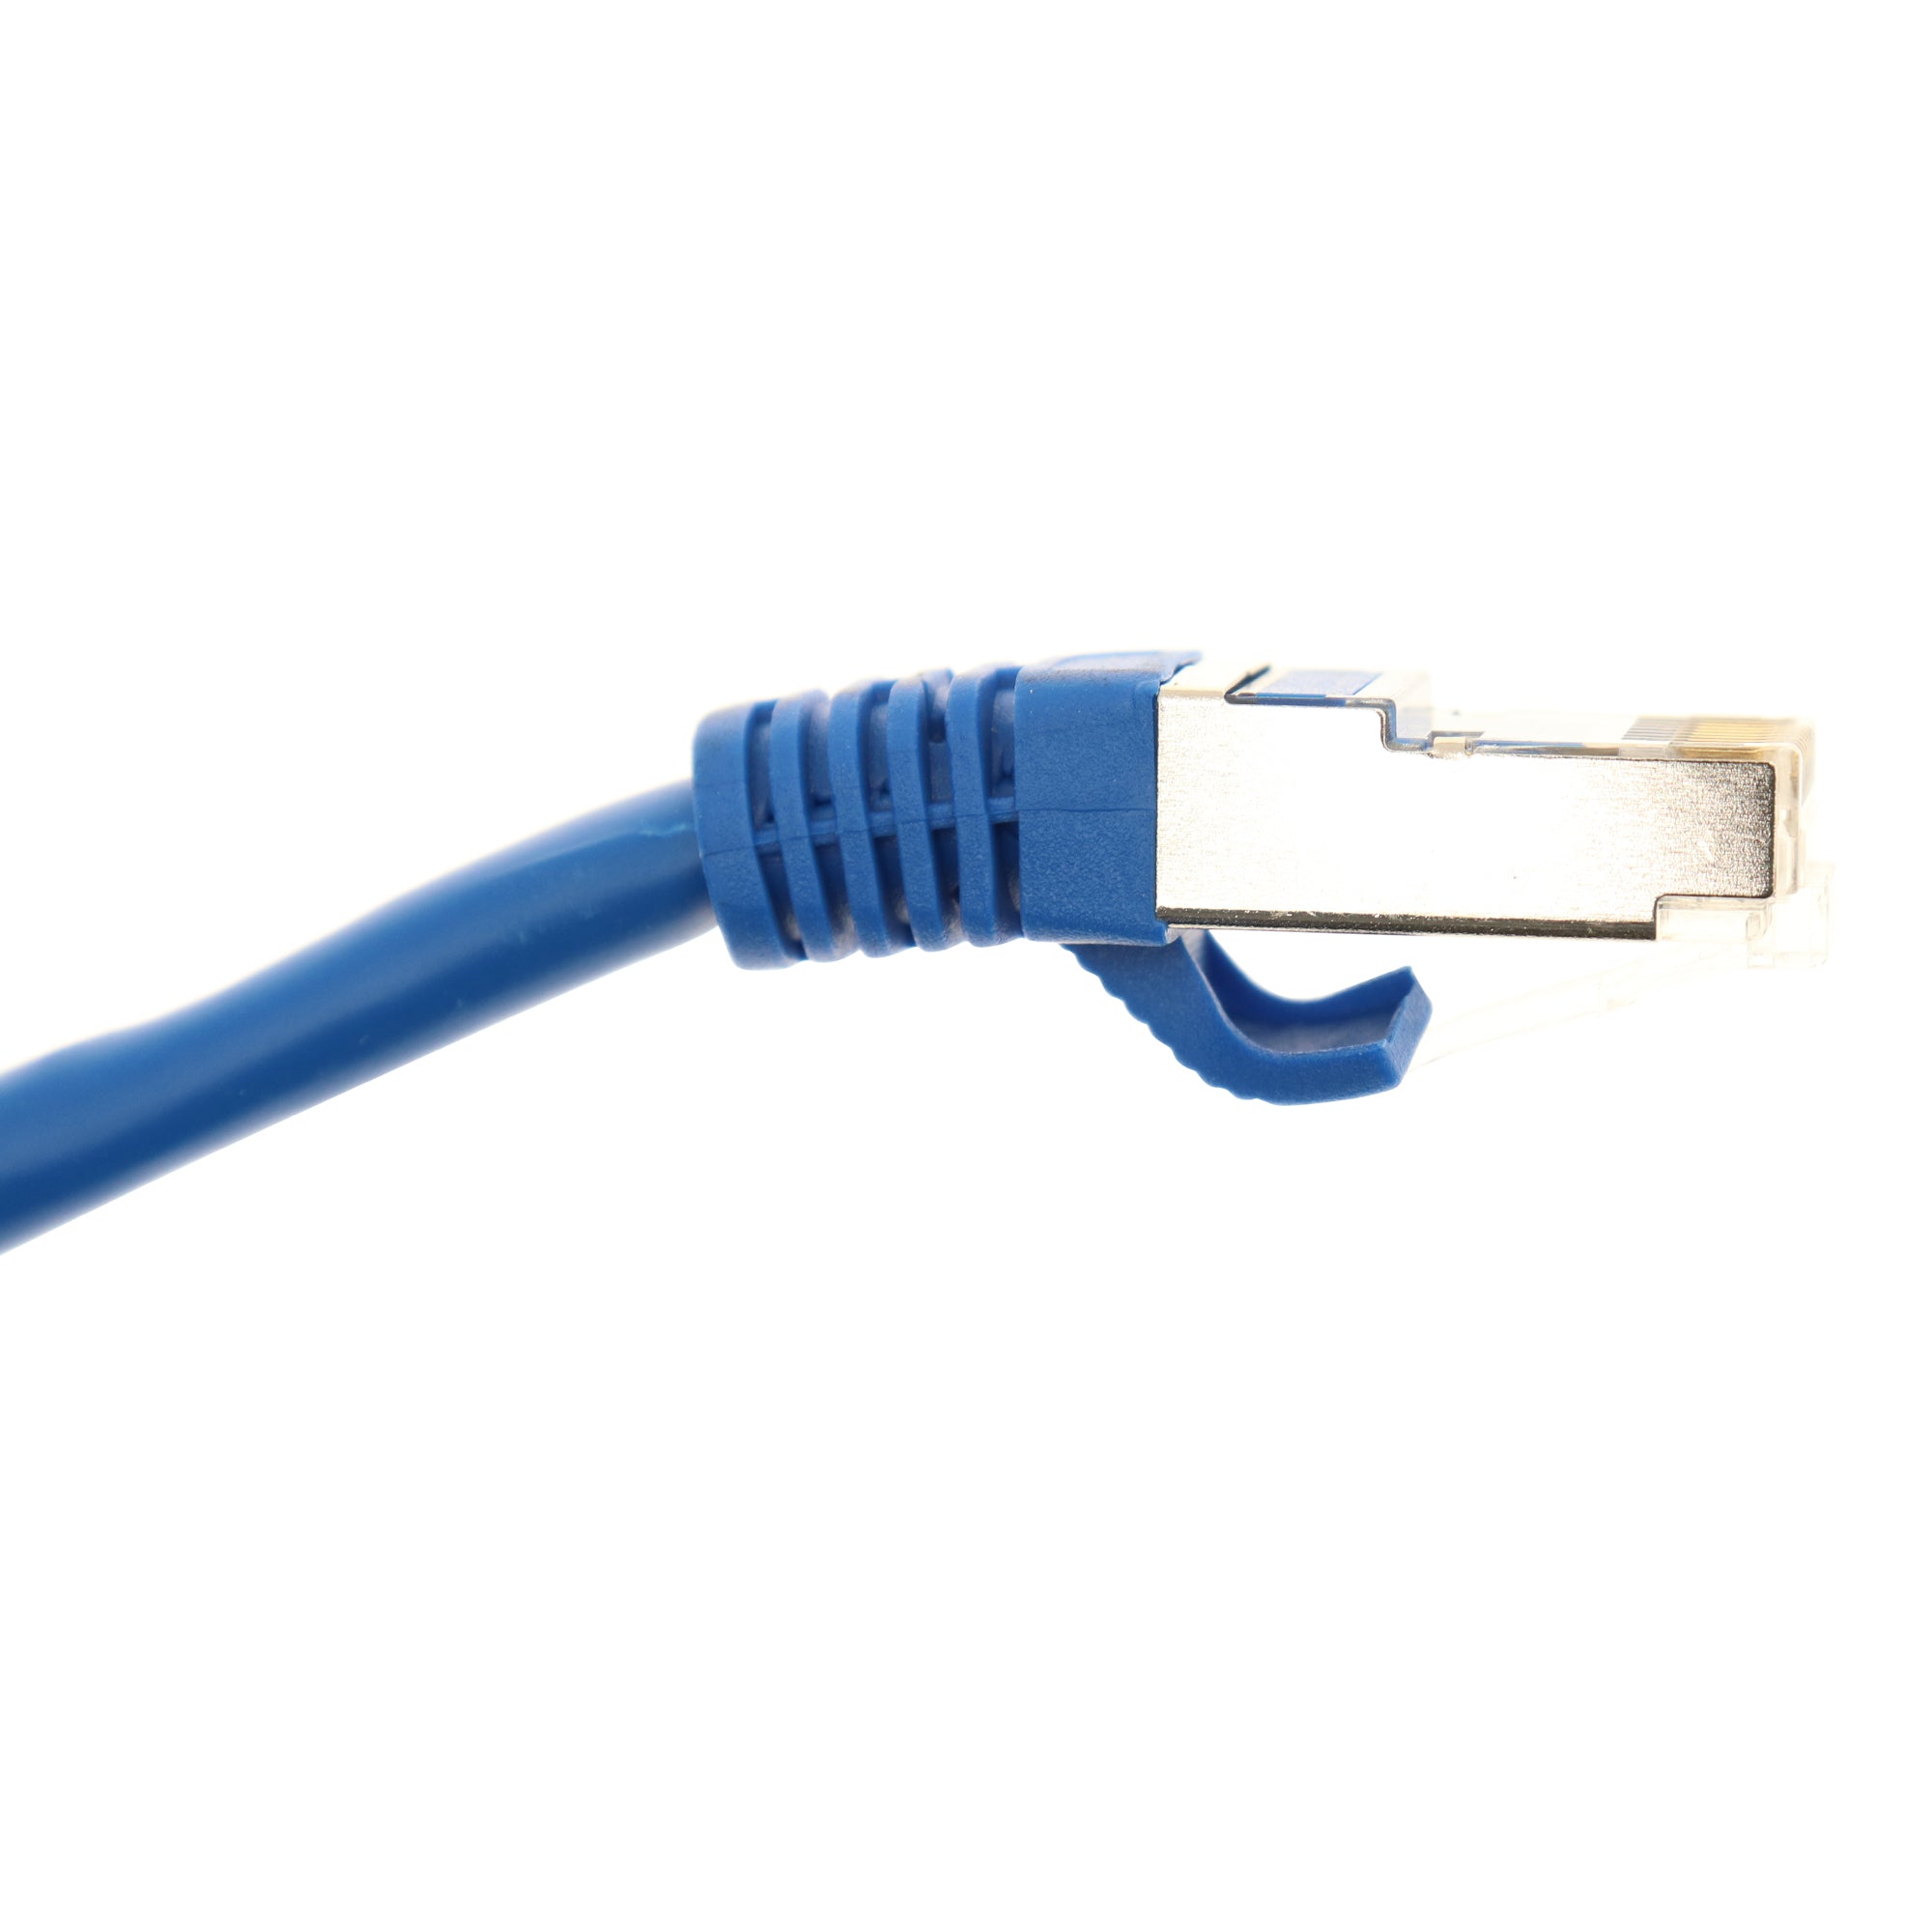 C2G, C2G 00796 CAT6 SNAGLESS SHIELDED STP NETWORK ETHERNET PATCH CABLE, BLUE, 15-FEET